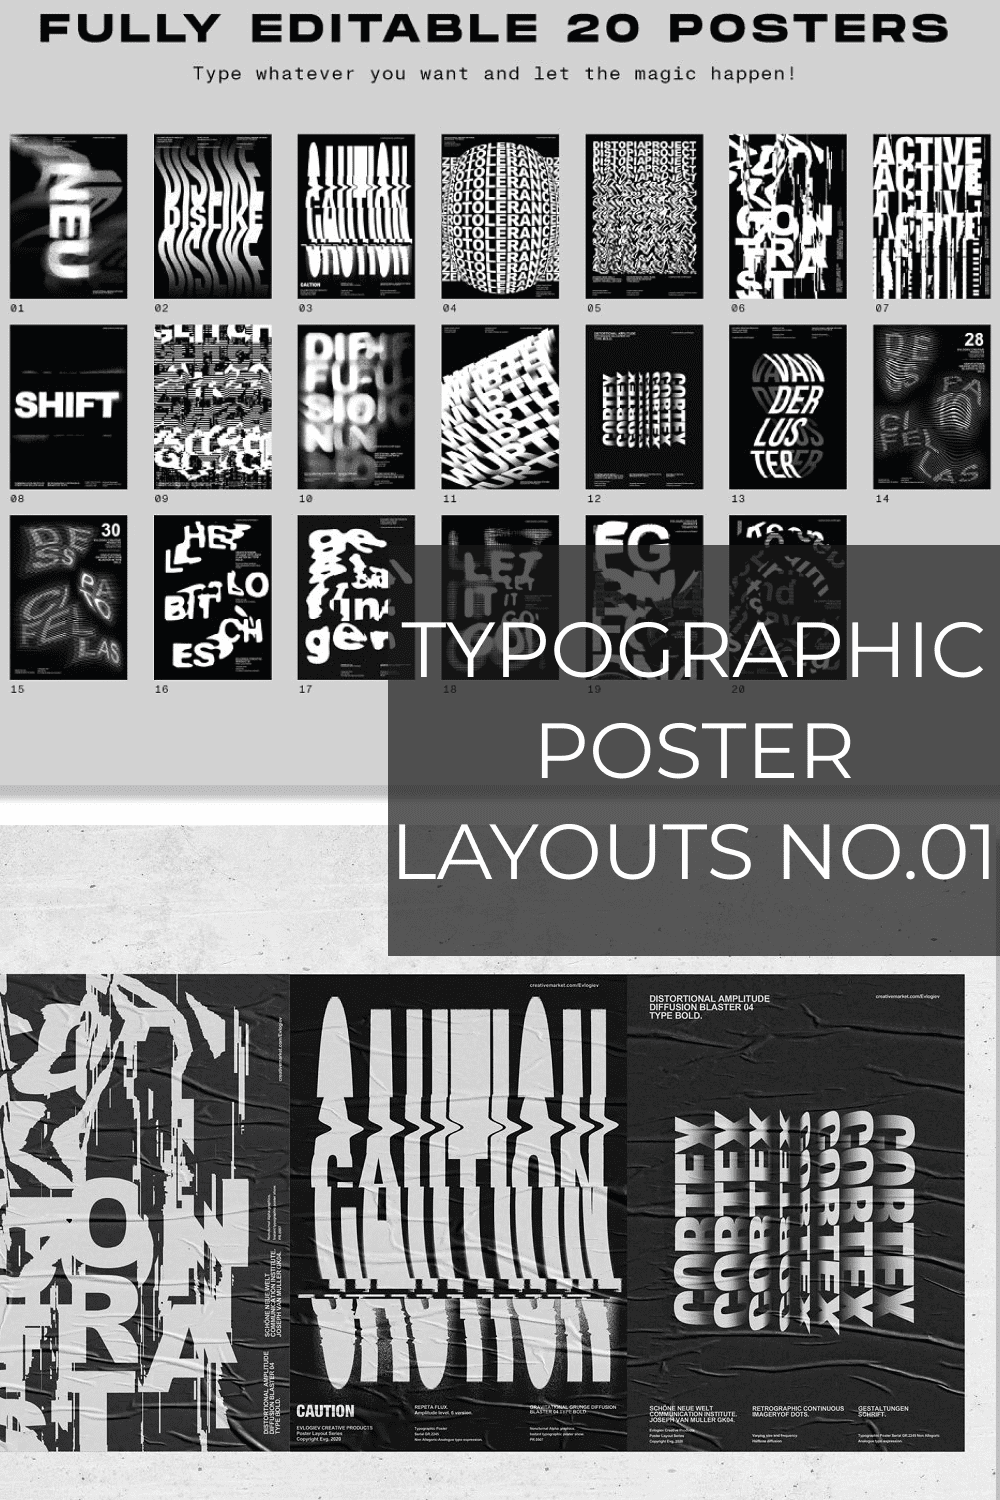 Typographic Poster Layouts No.01 pinterest image.